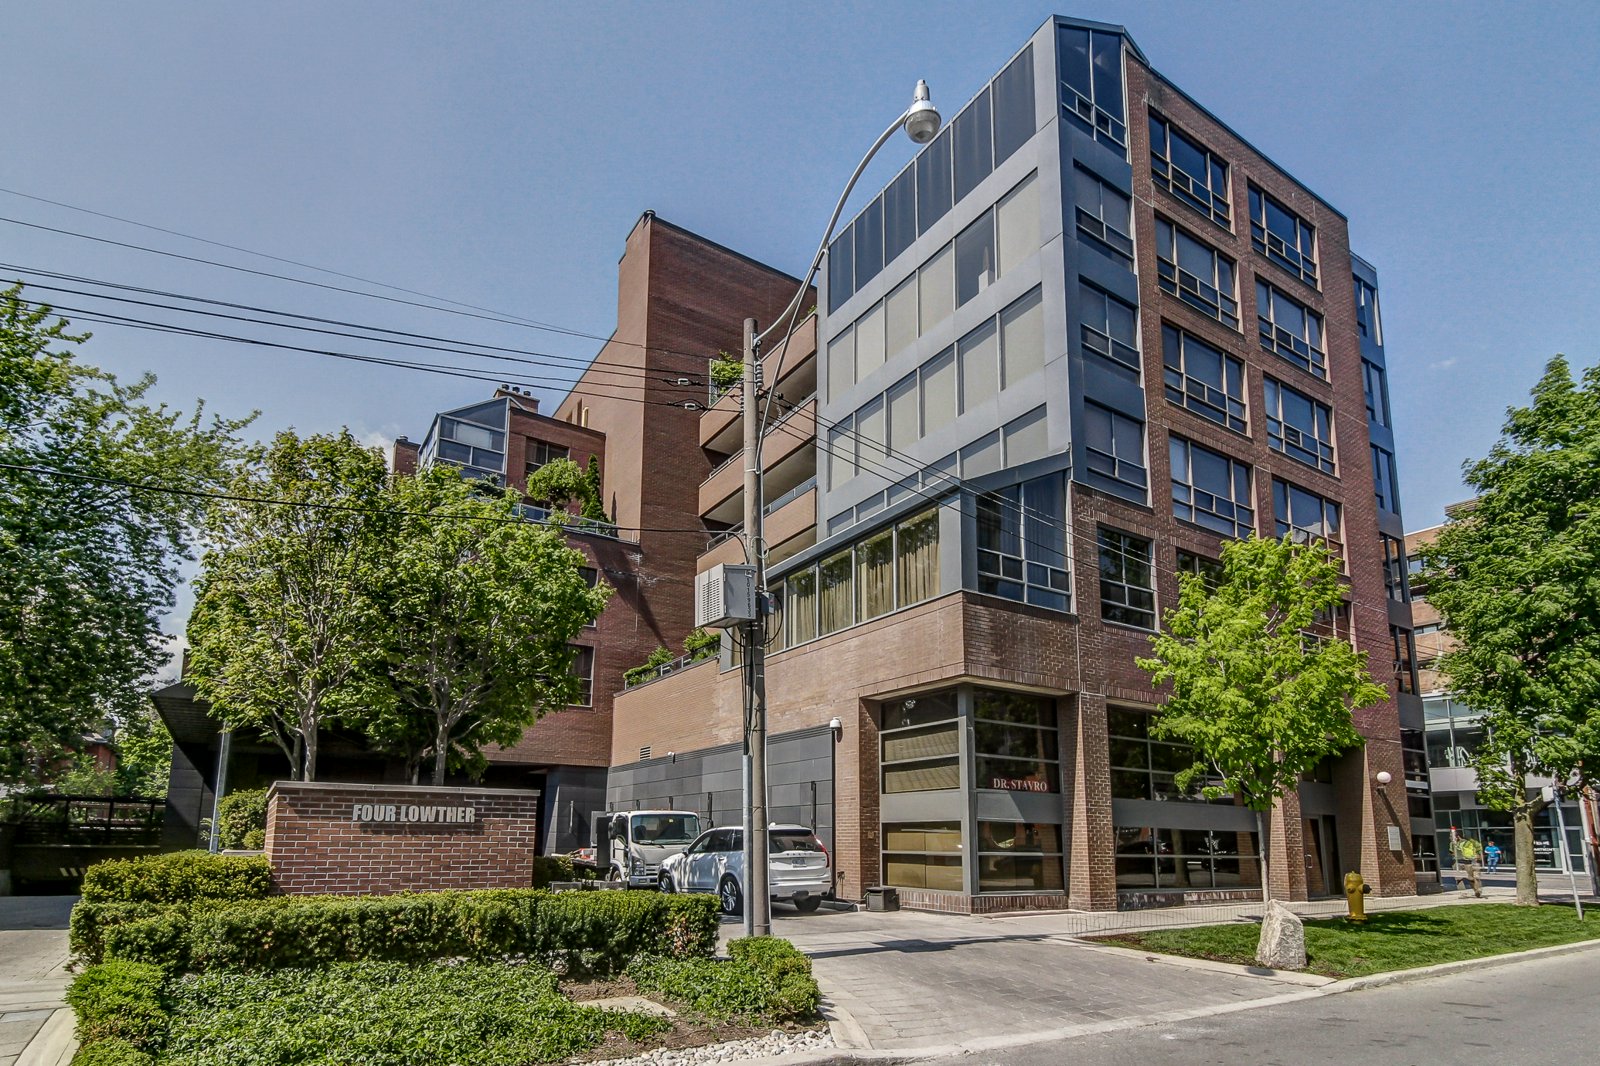 Sold- Toronto Condominium on Lowther Ave.